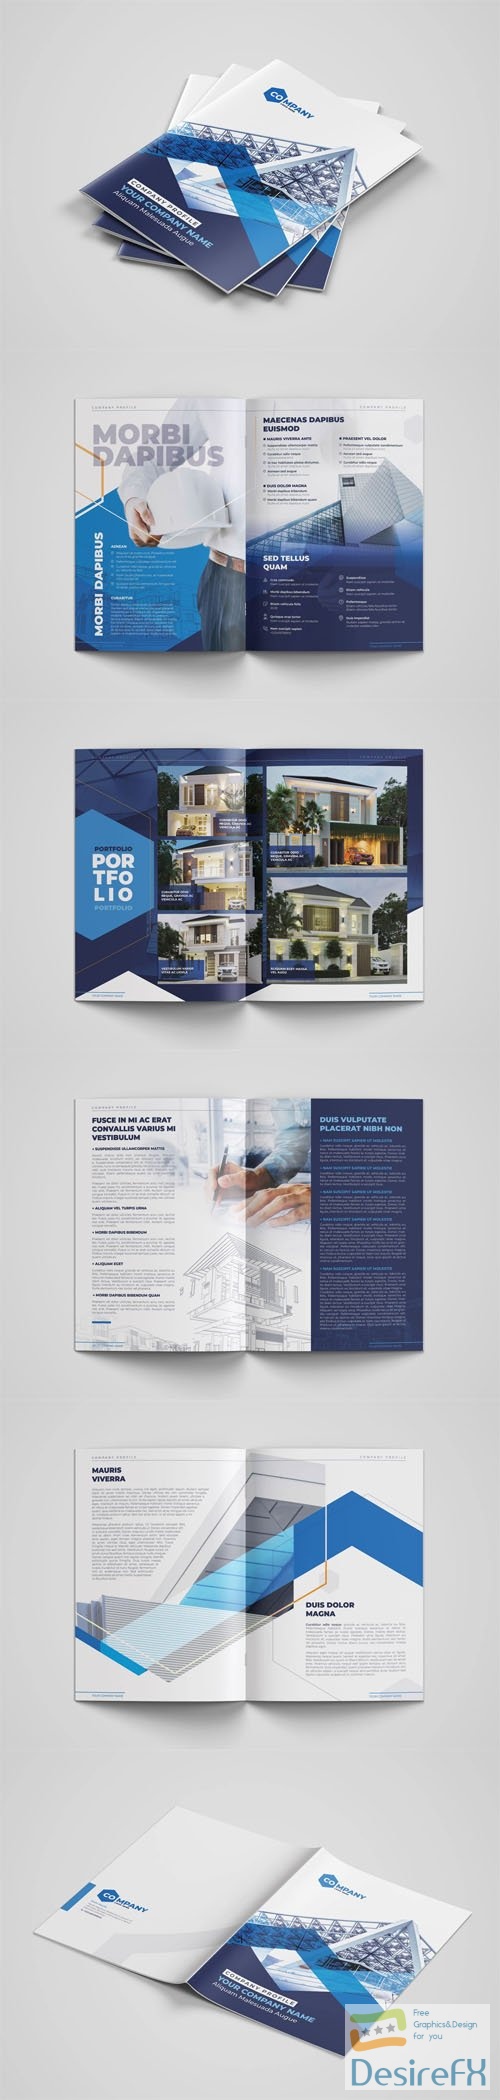 Architect Company Profile - A4 Booklet Indesign Template